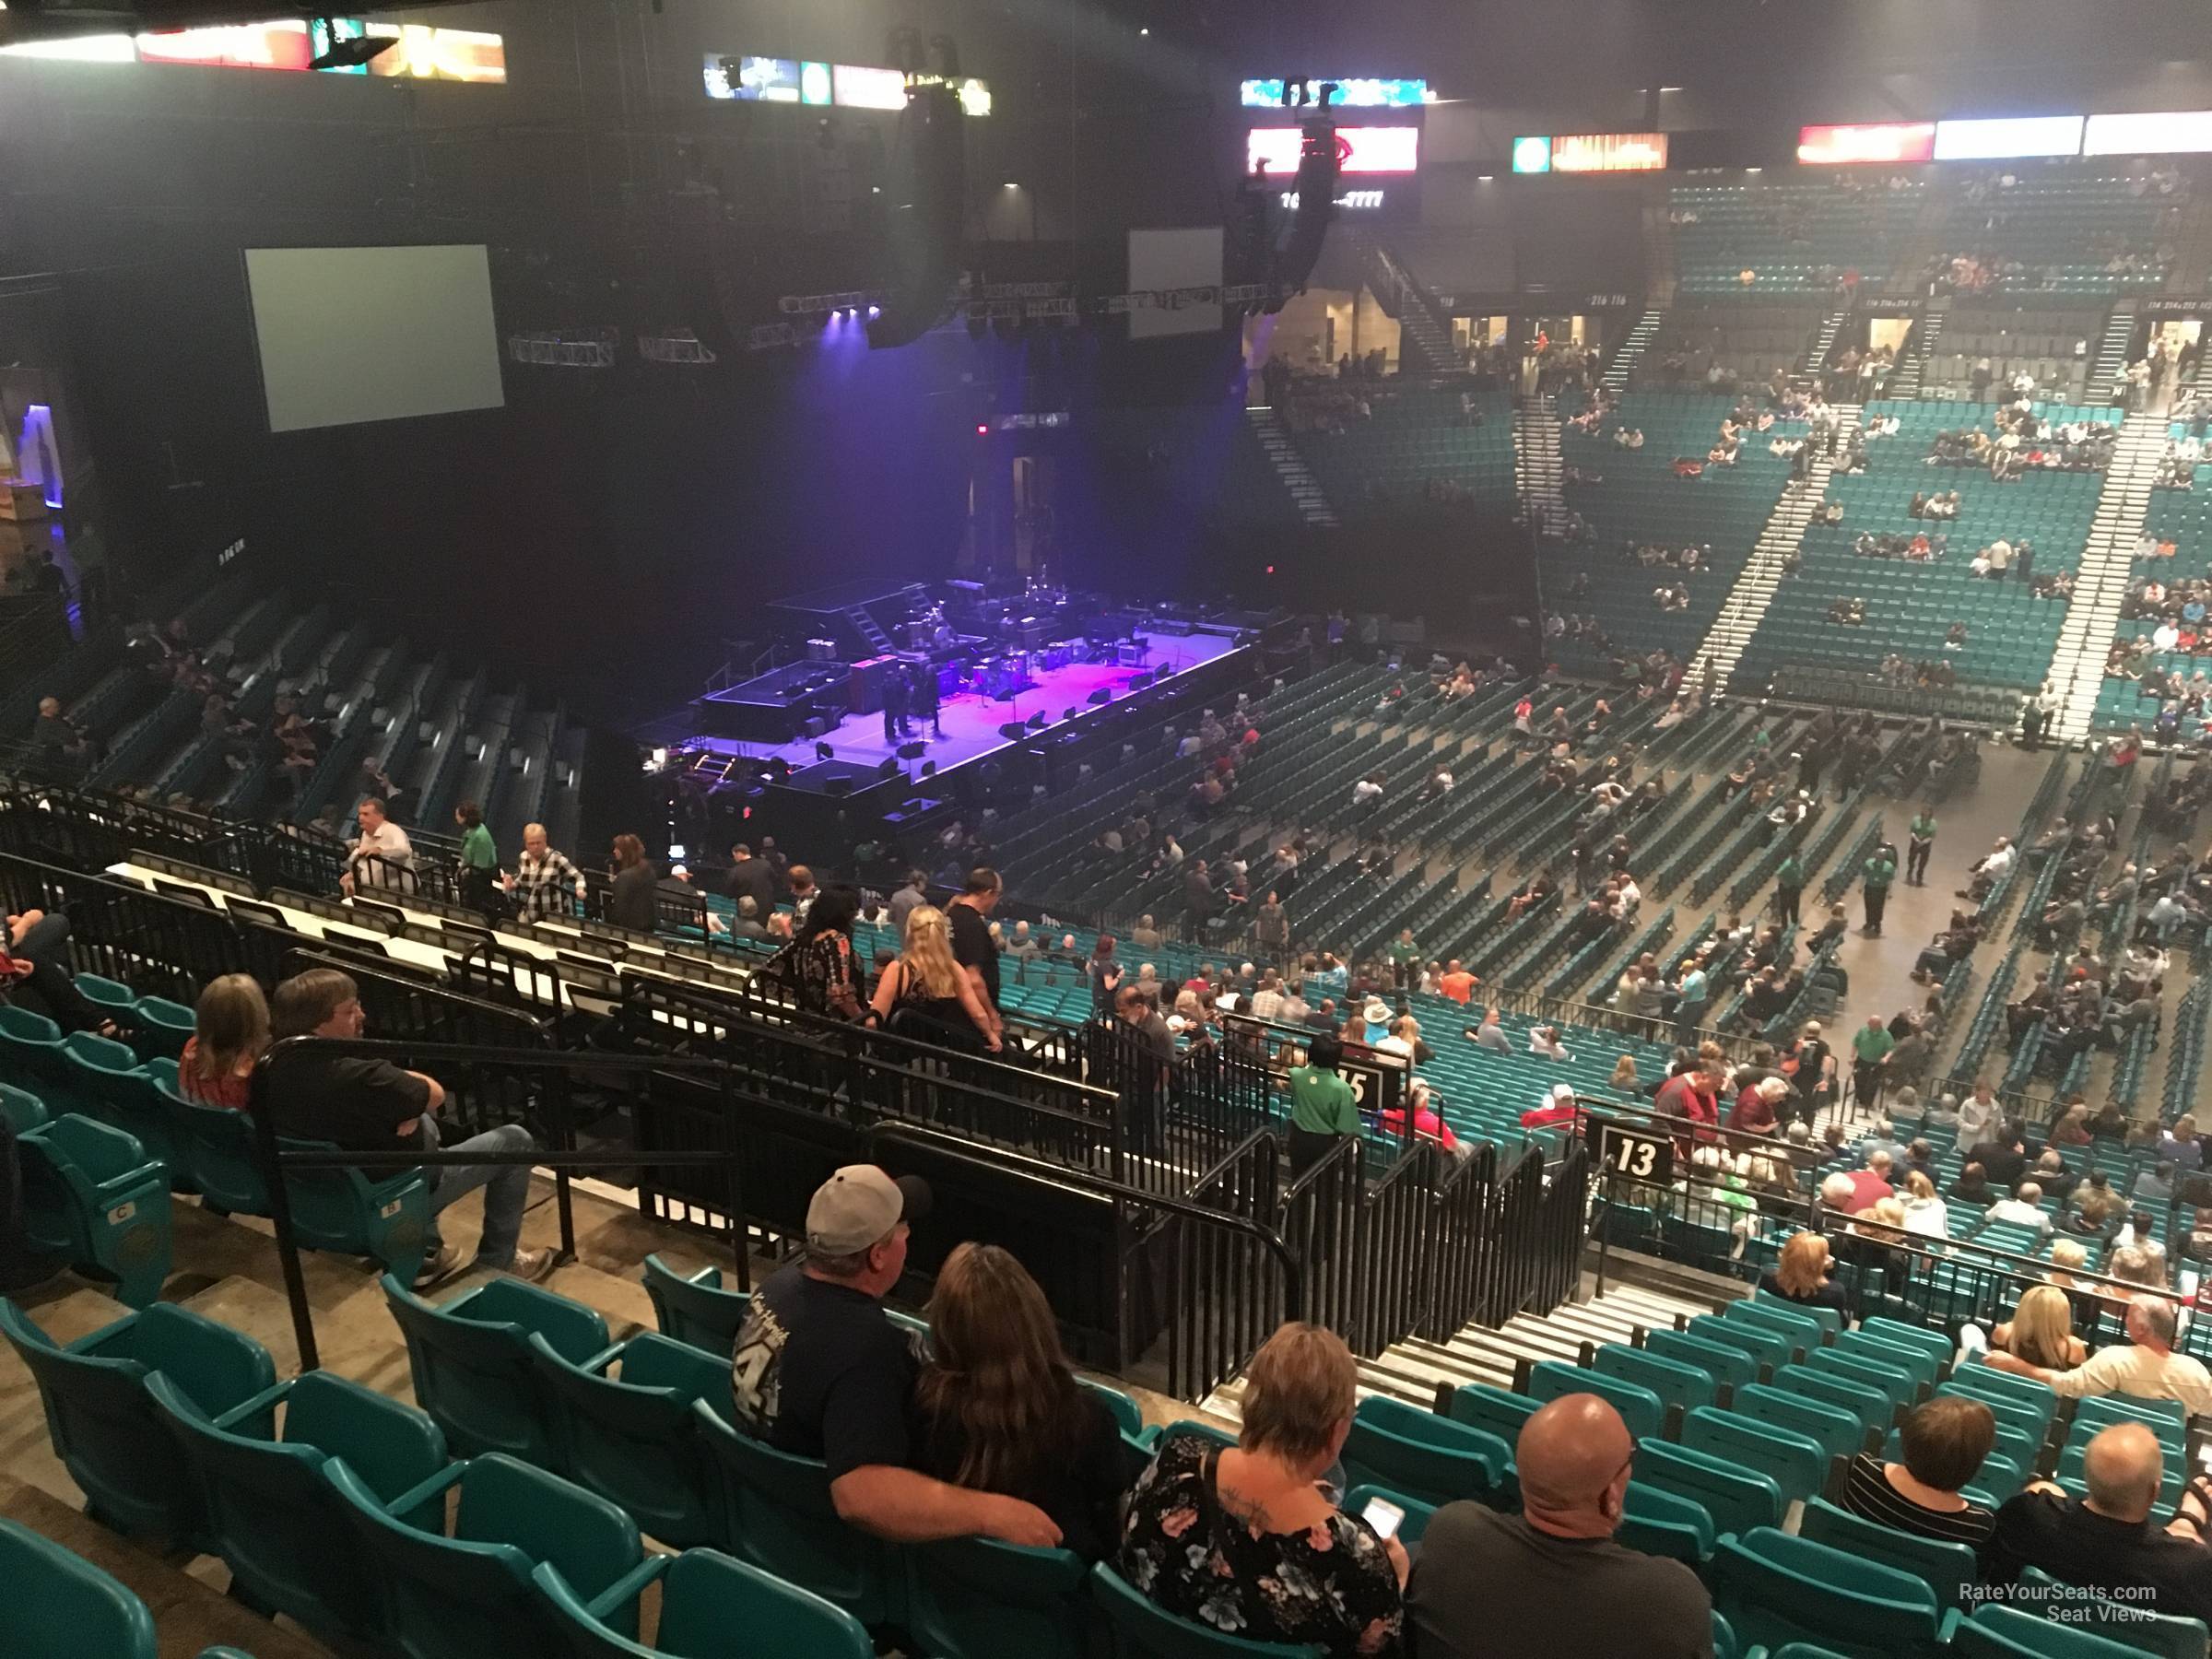 Section 213 at MGM Grand Garden Arena